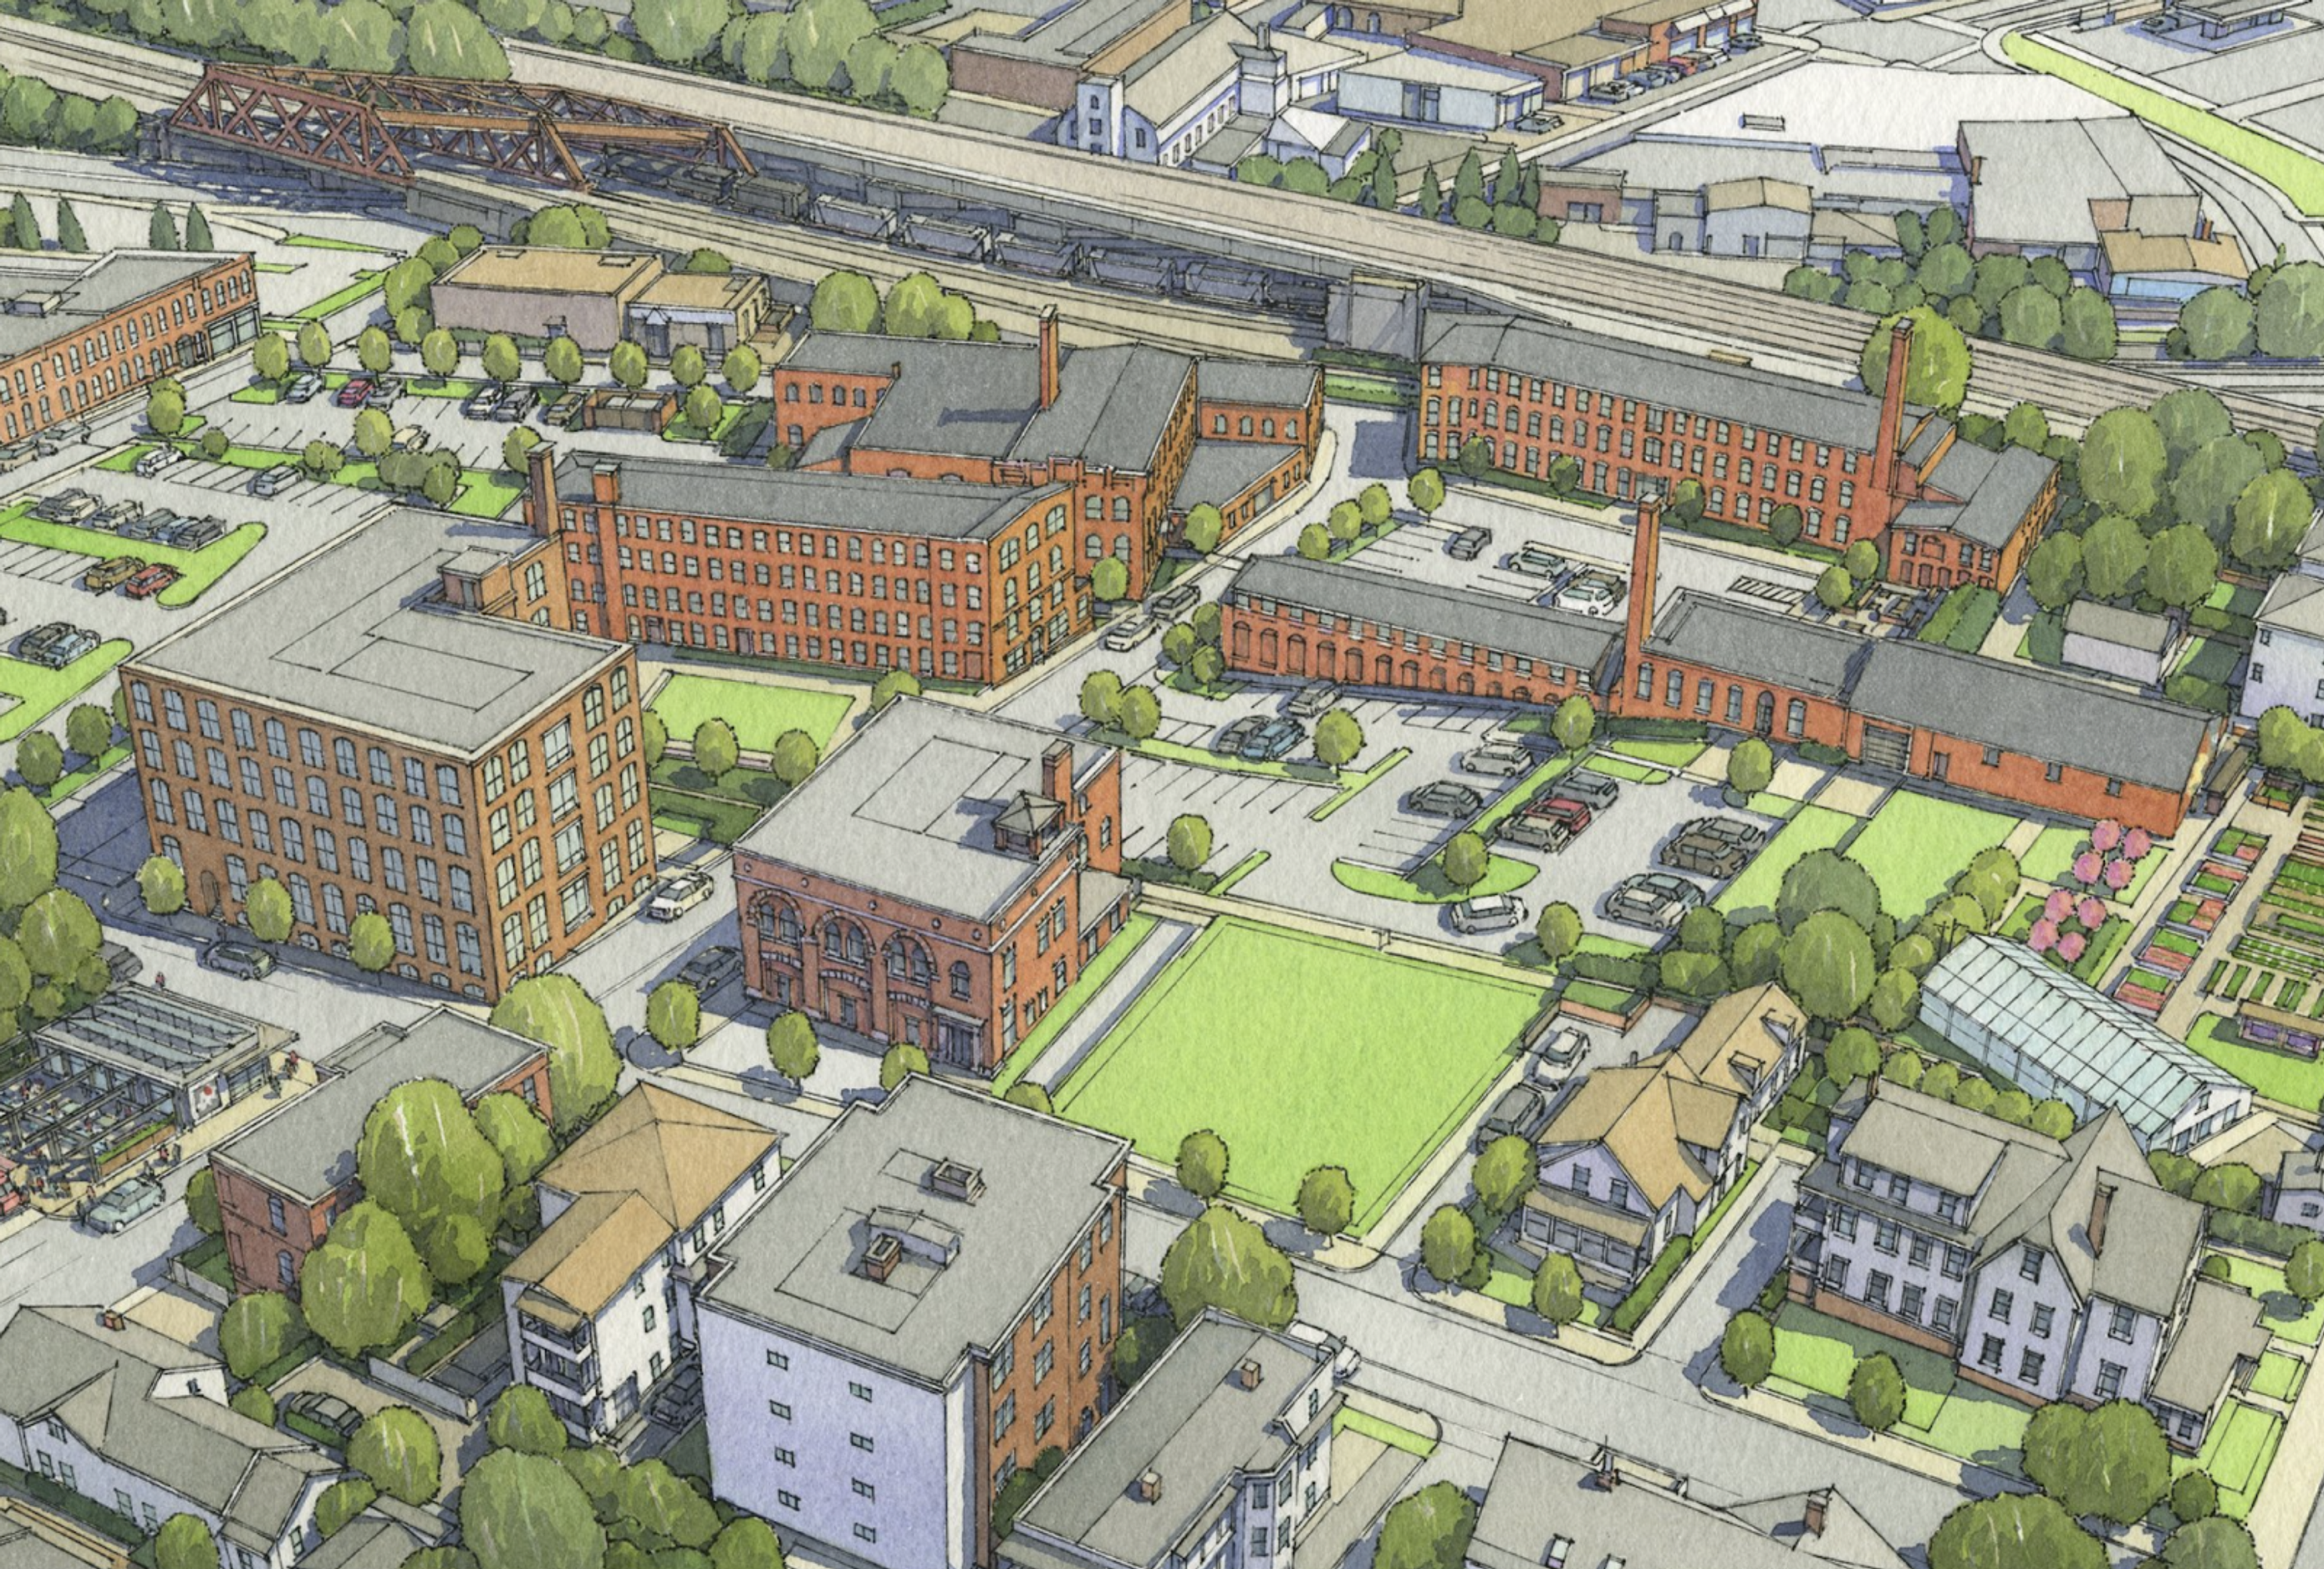 Concept art for the LaGrange Street Mill Complex redevelopment project